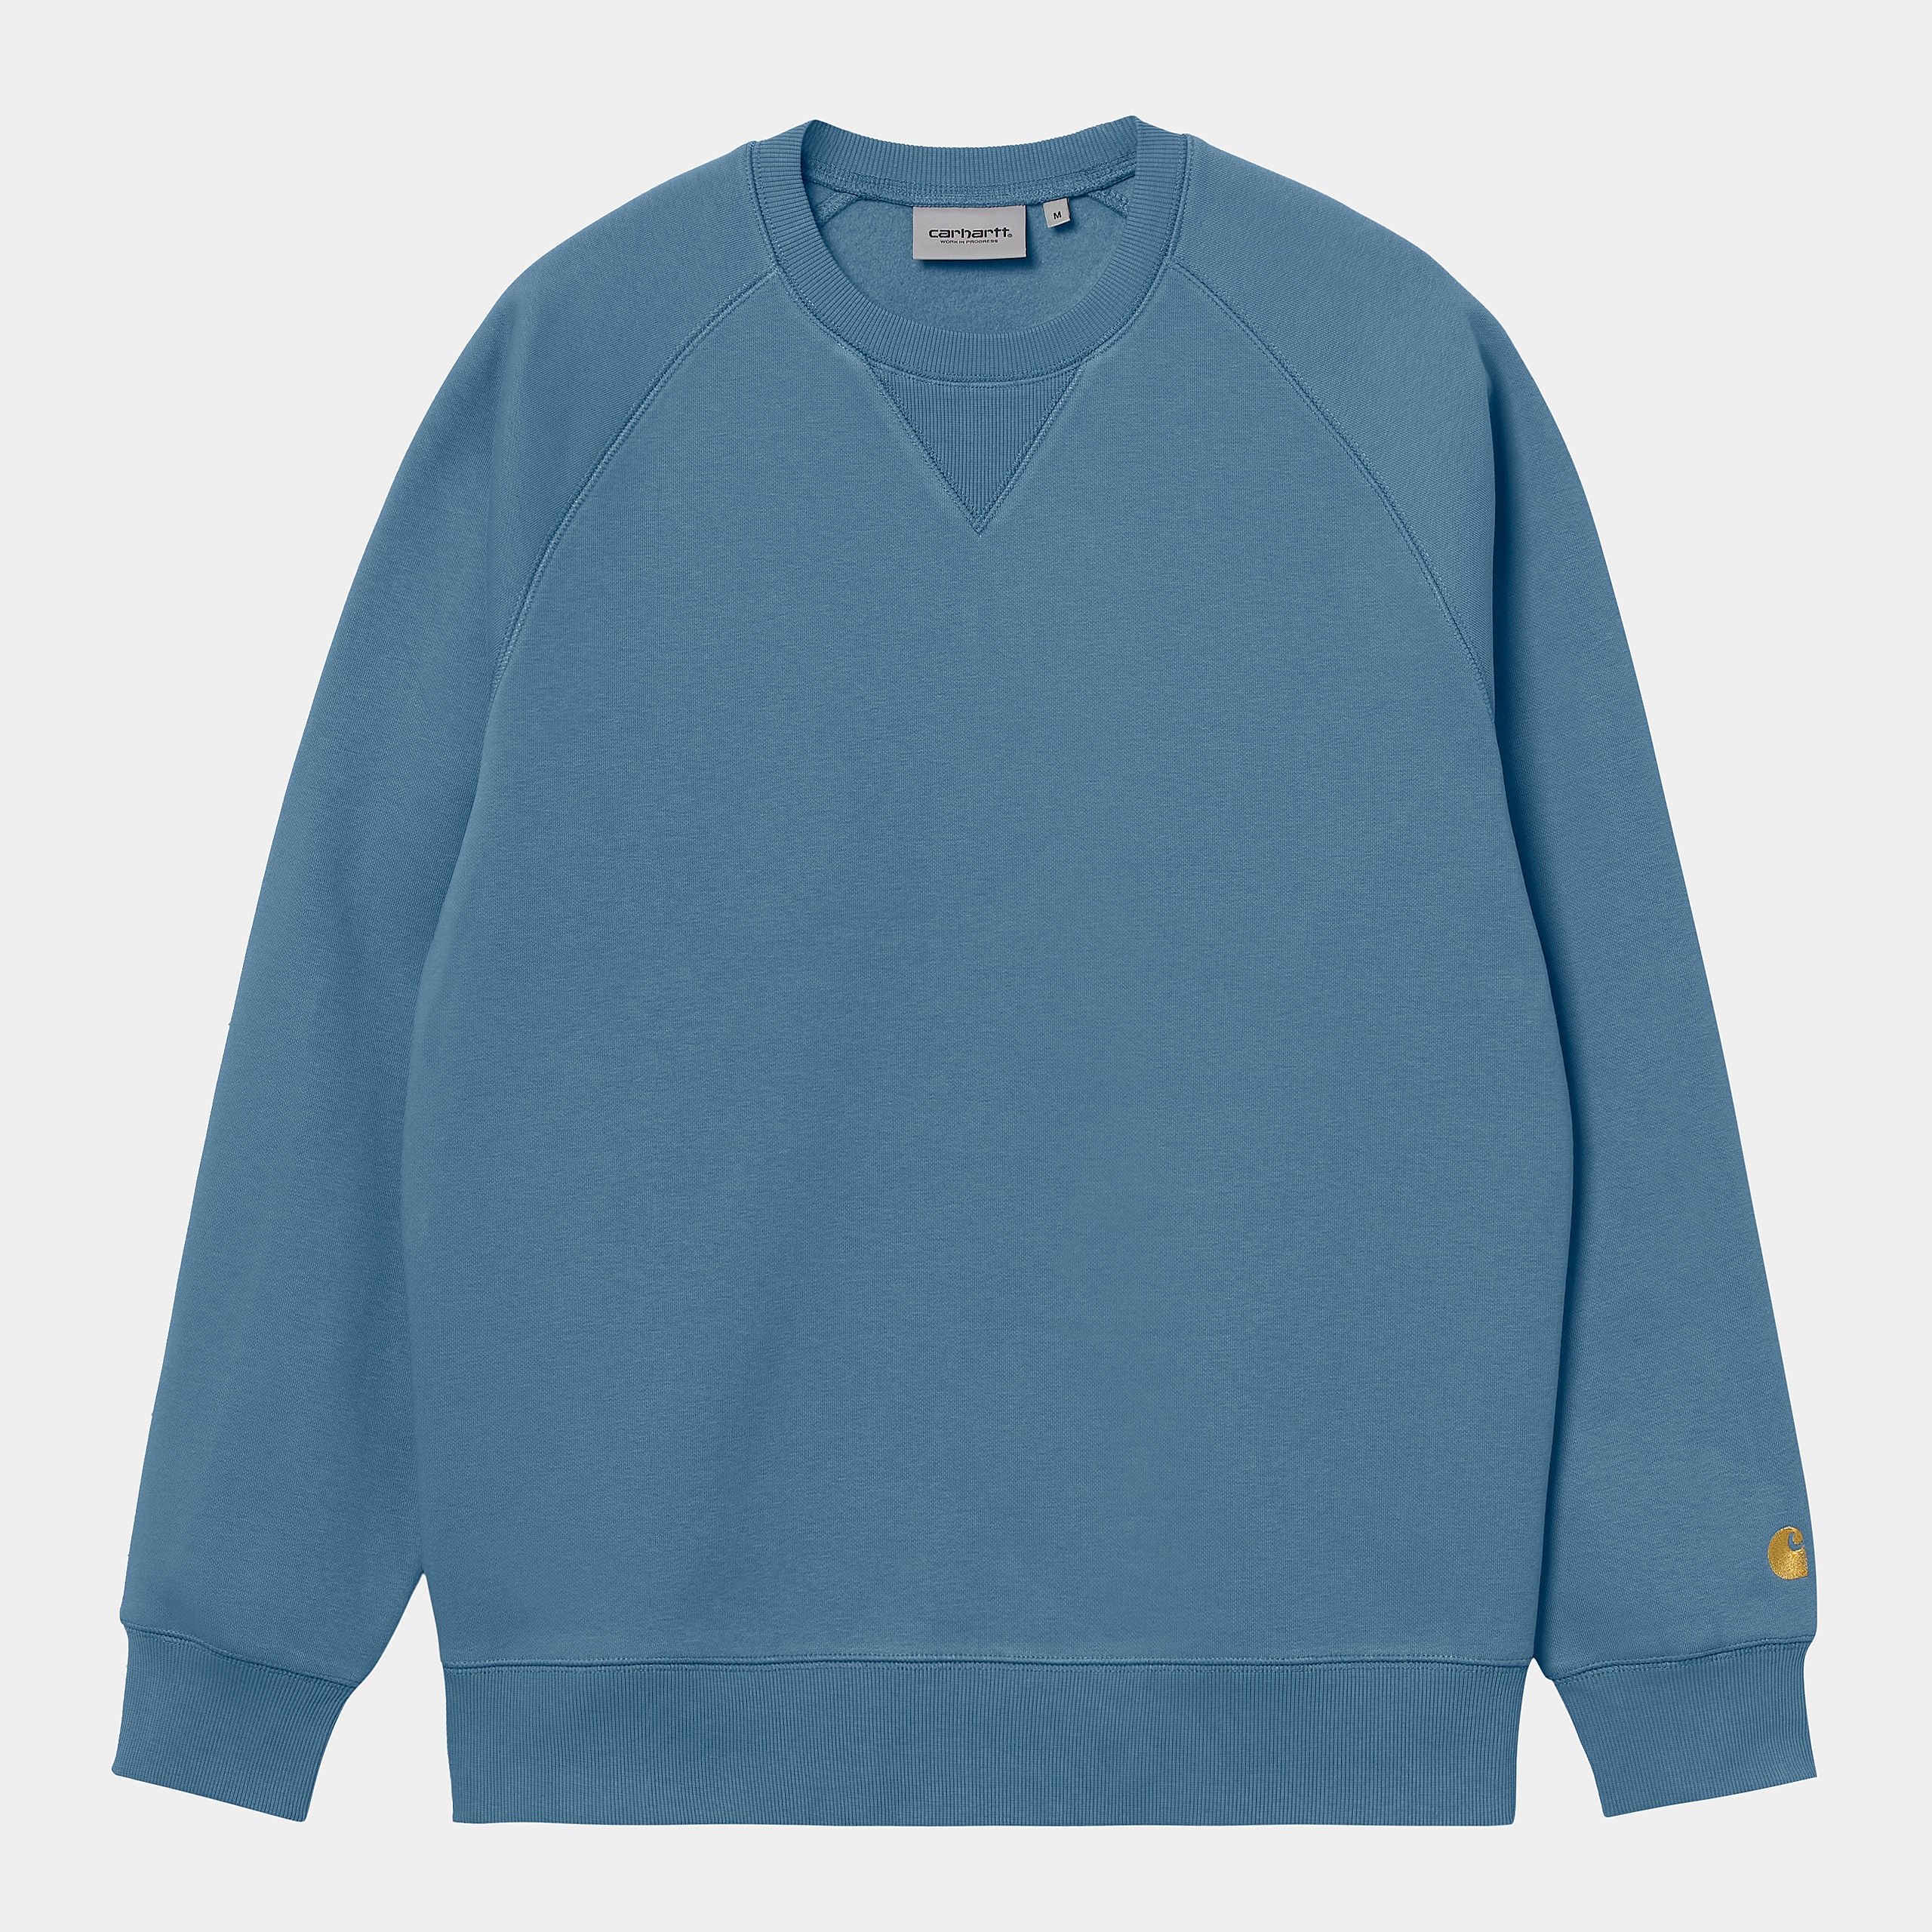 Carhartt Mens Chase Sweat Top - Icy Water / Gold